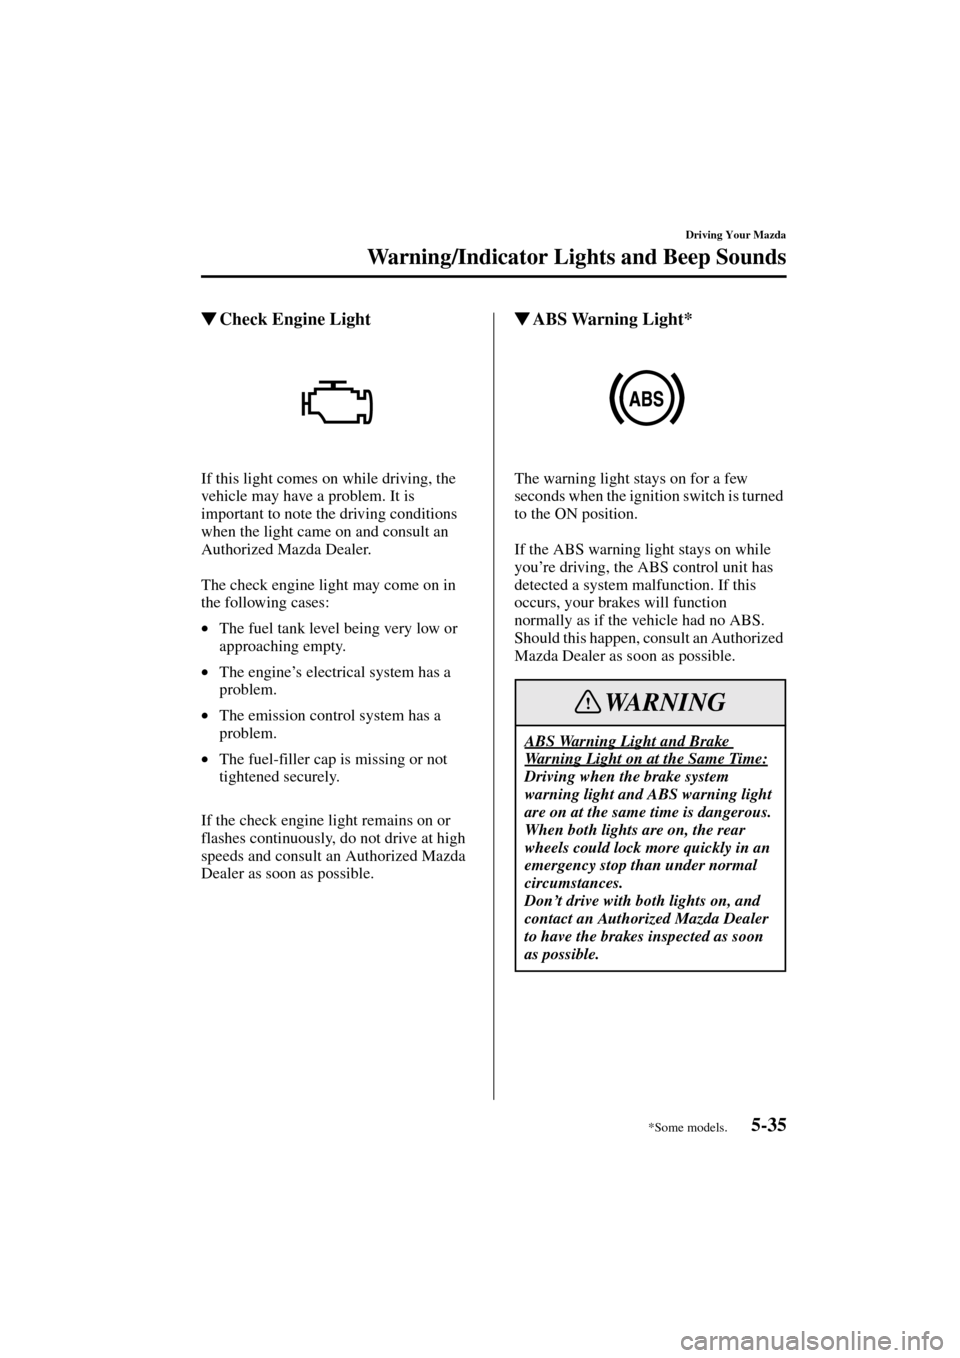 MAZDA MODEL 3 HATCHBACK 2004  Owners Manual (in English) 5-35
Driving Your Mazda
Warning/Indicator Lights and Beep Sounds
Form No. 8S18-EA-03I
Check Engine Light
If this light comes on while driving, the 
vehicle may have a problem. It is 
important to not